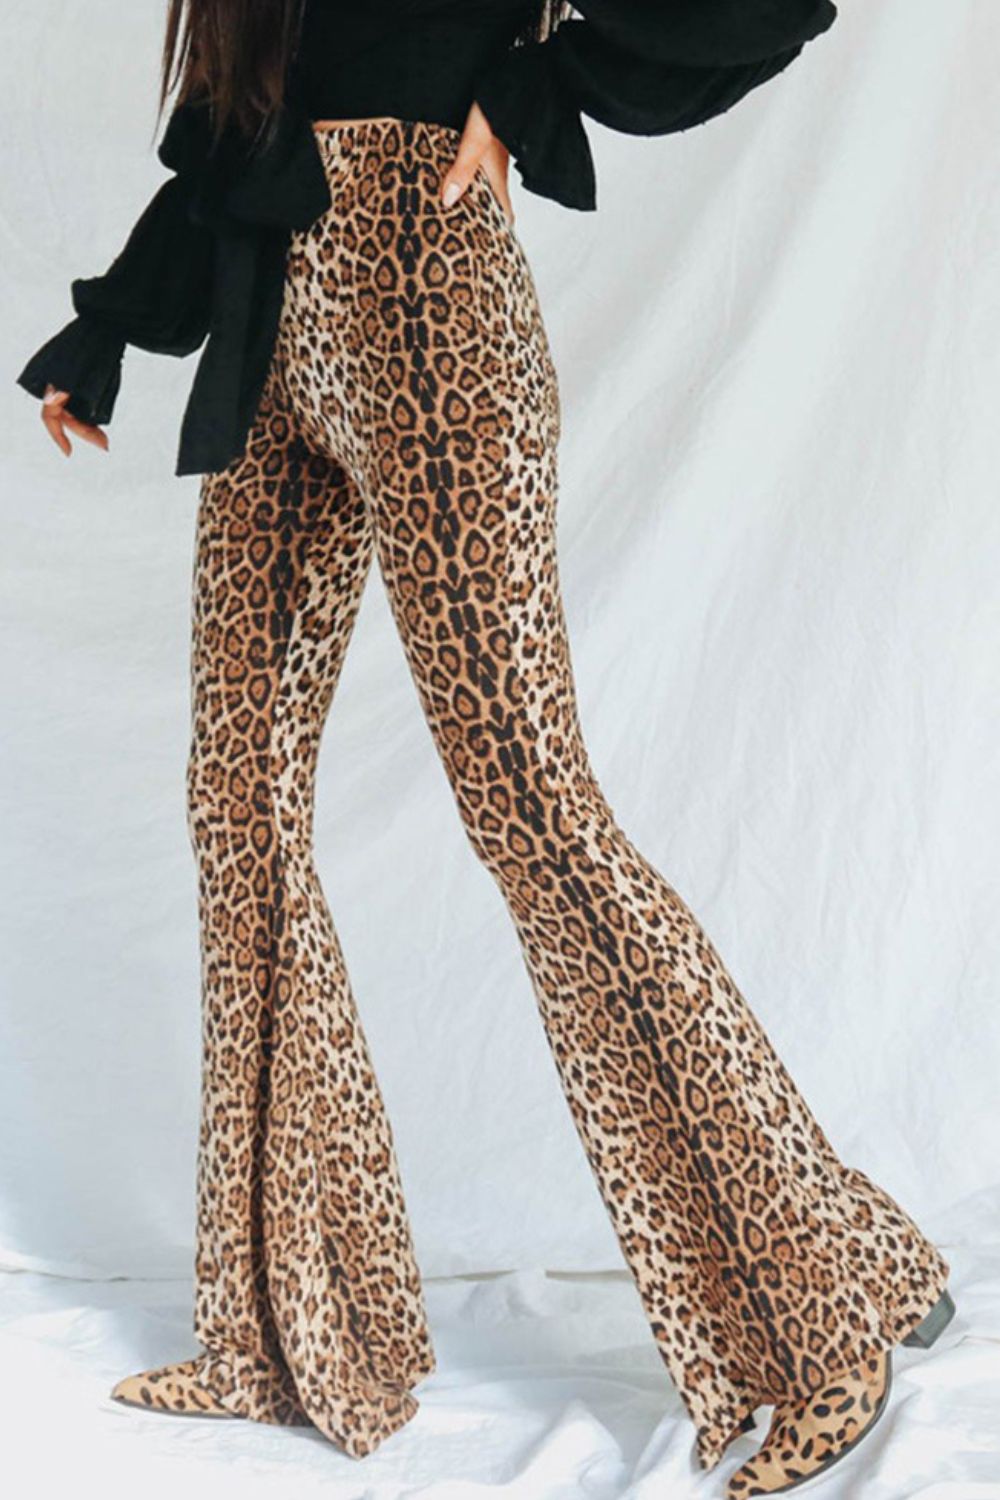 15 Leopard Printed Cropped Pants Outfits - Styleoholic